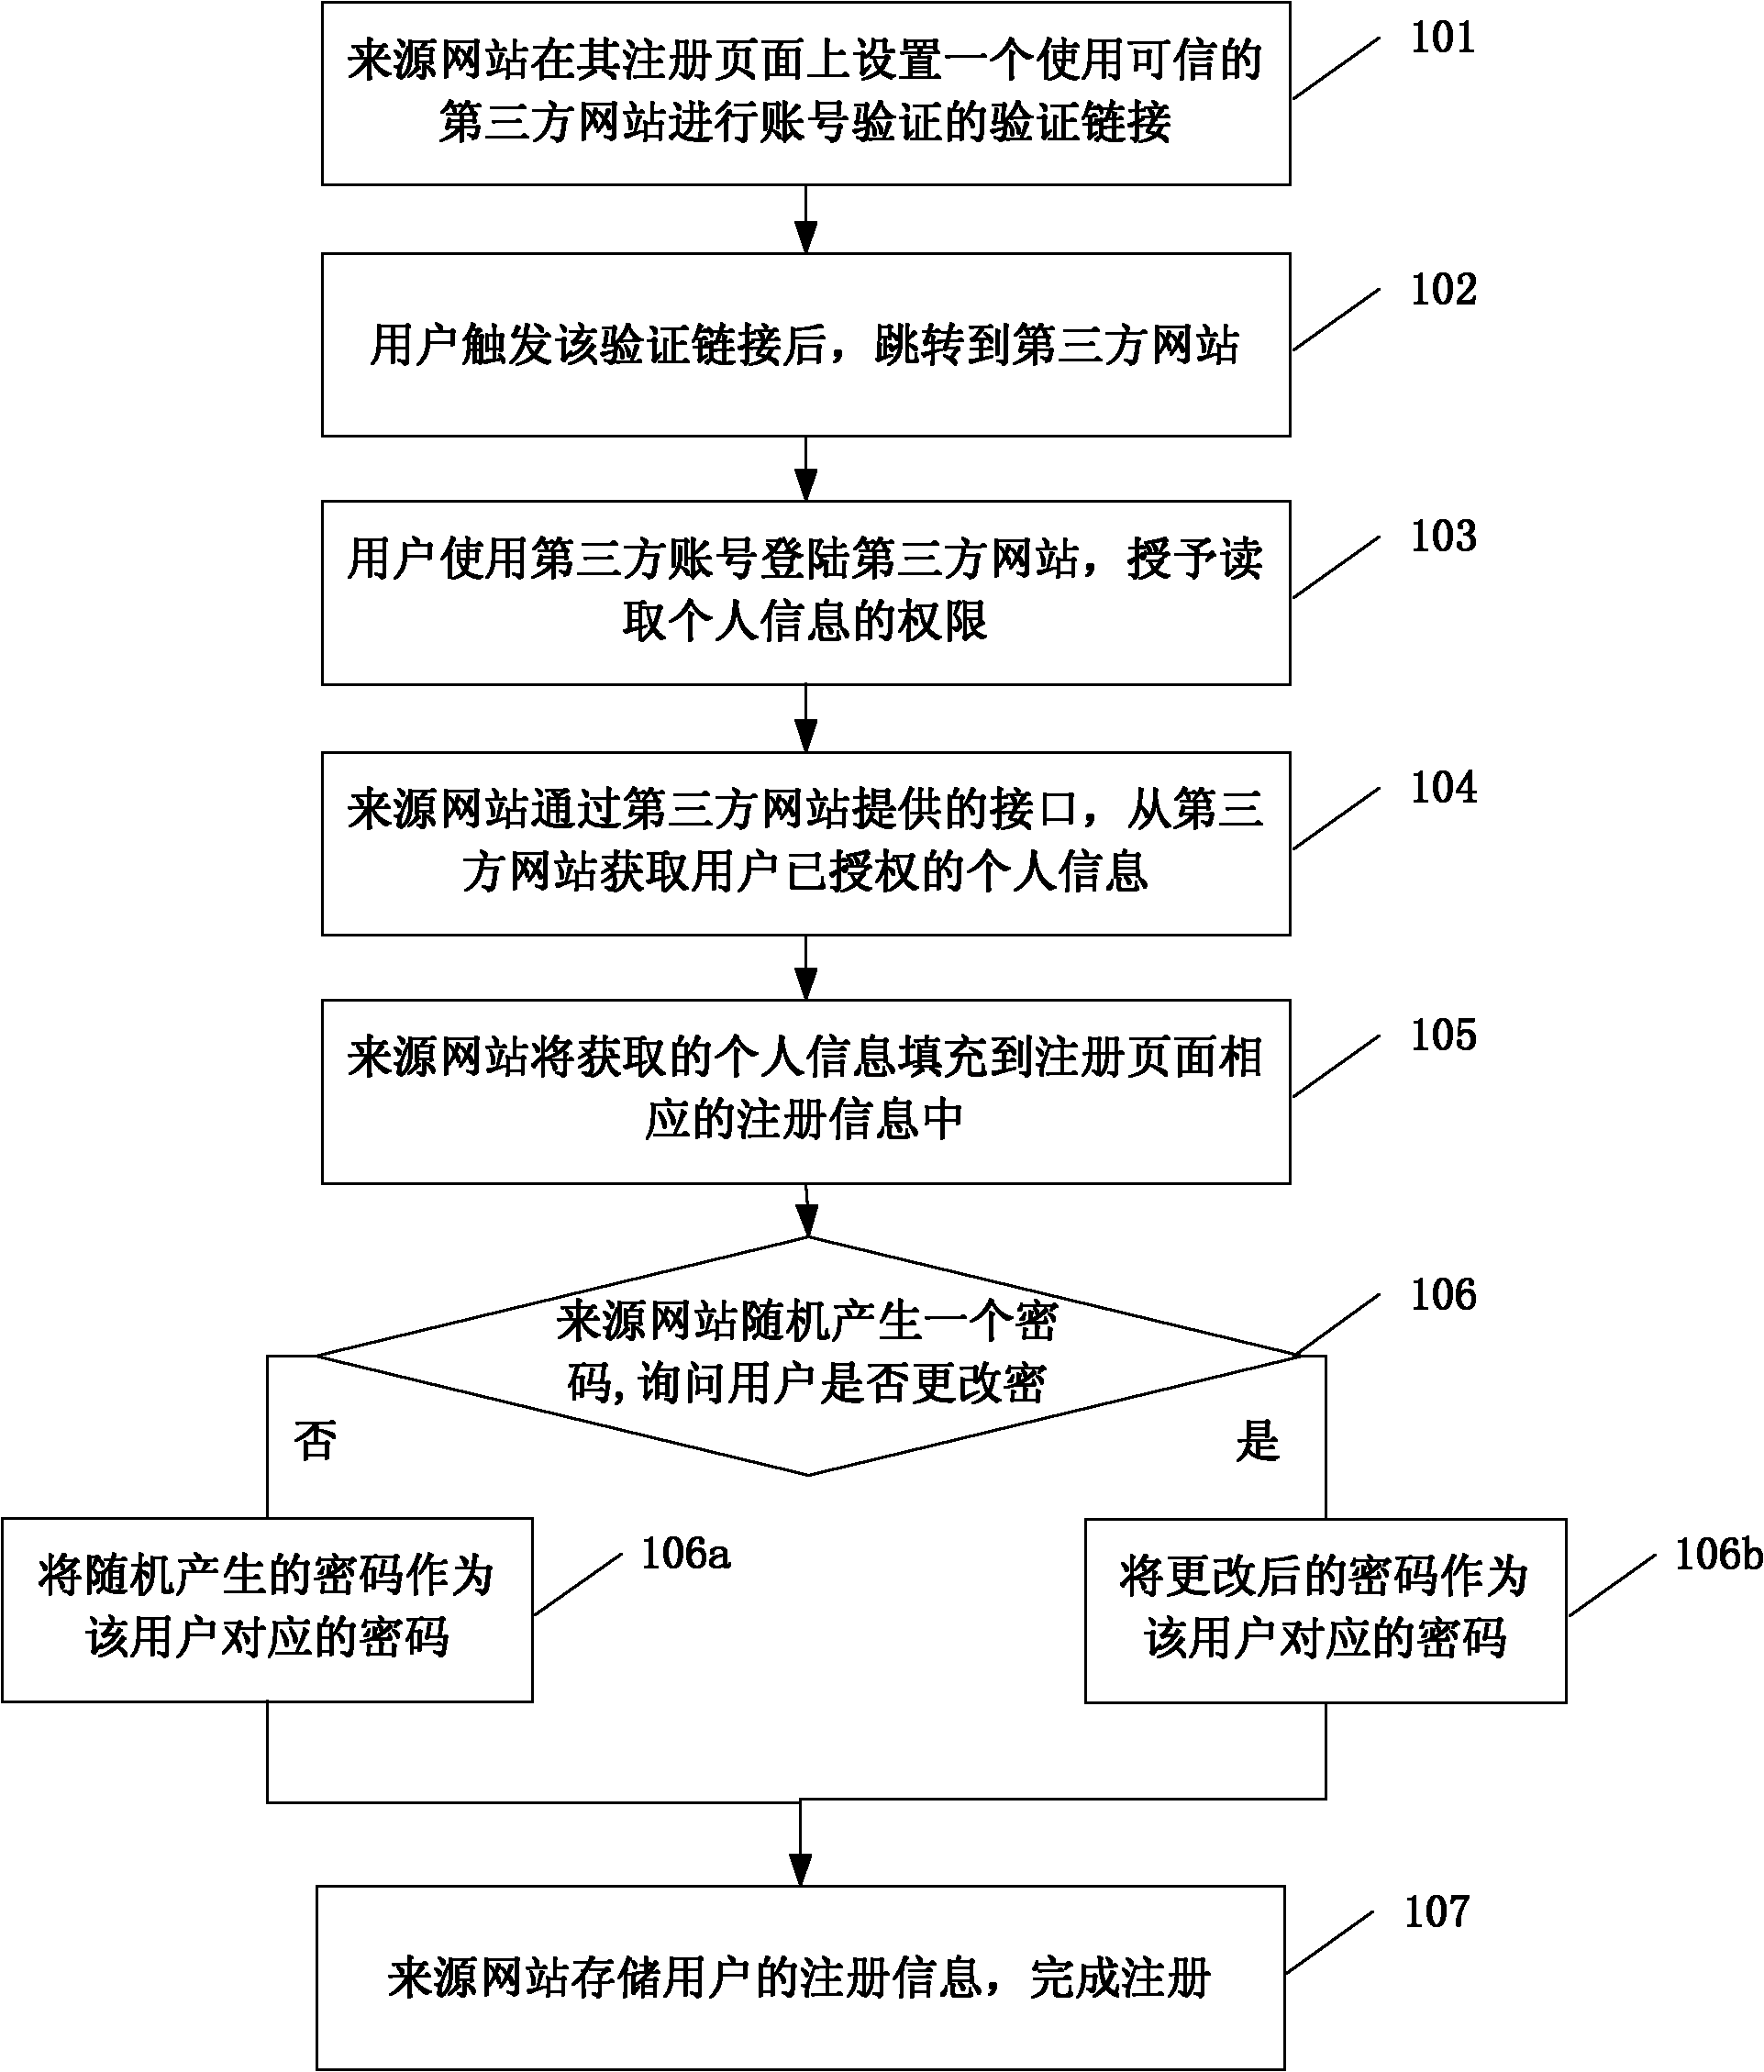 Method and system for registration or login via third-party website